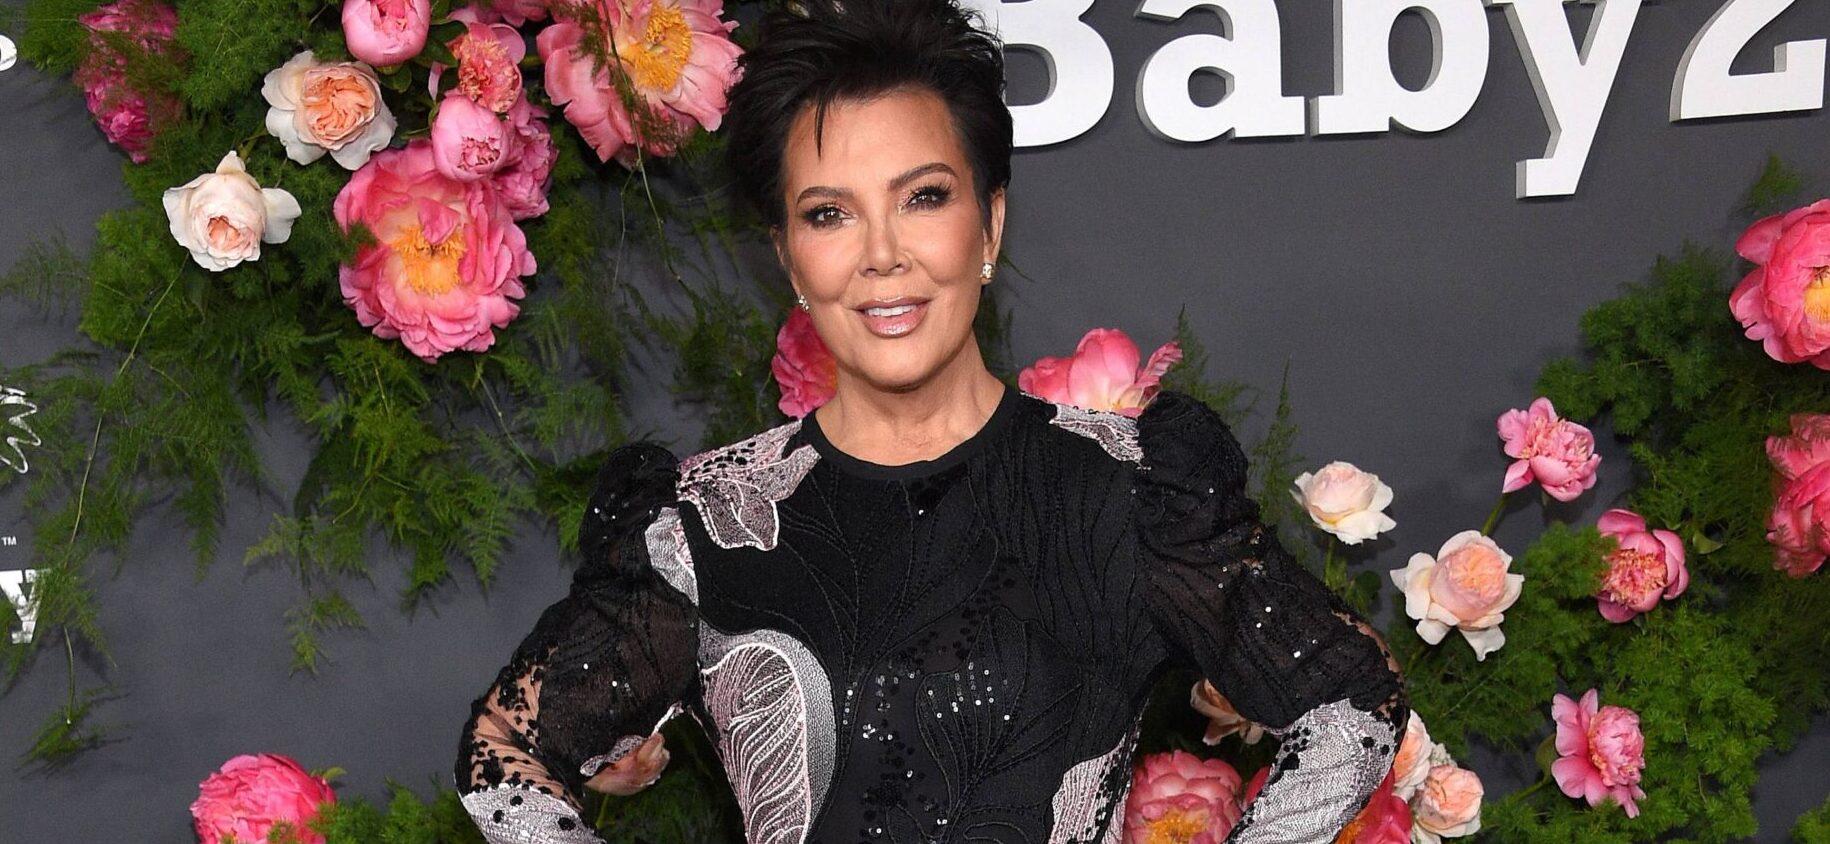 Kris Jenner Reveals Her Only Sister Karen Houghton Has Died ‘Unexpectedly’